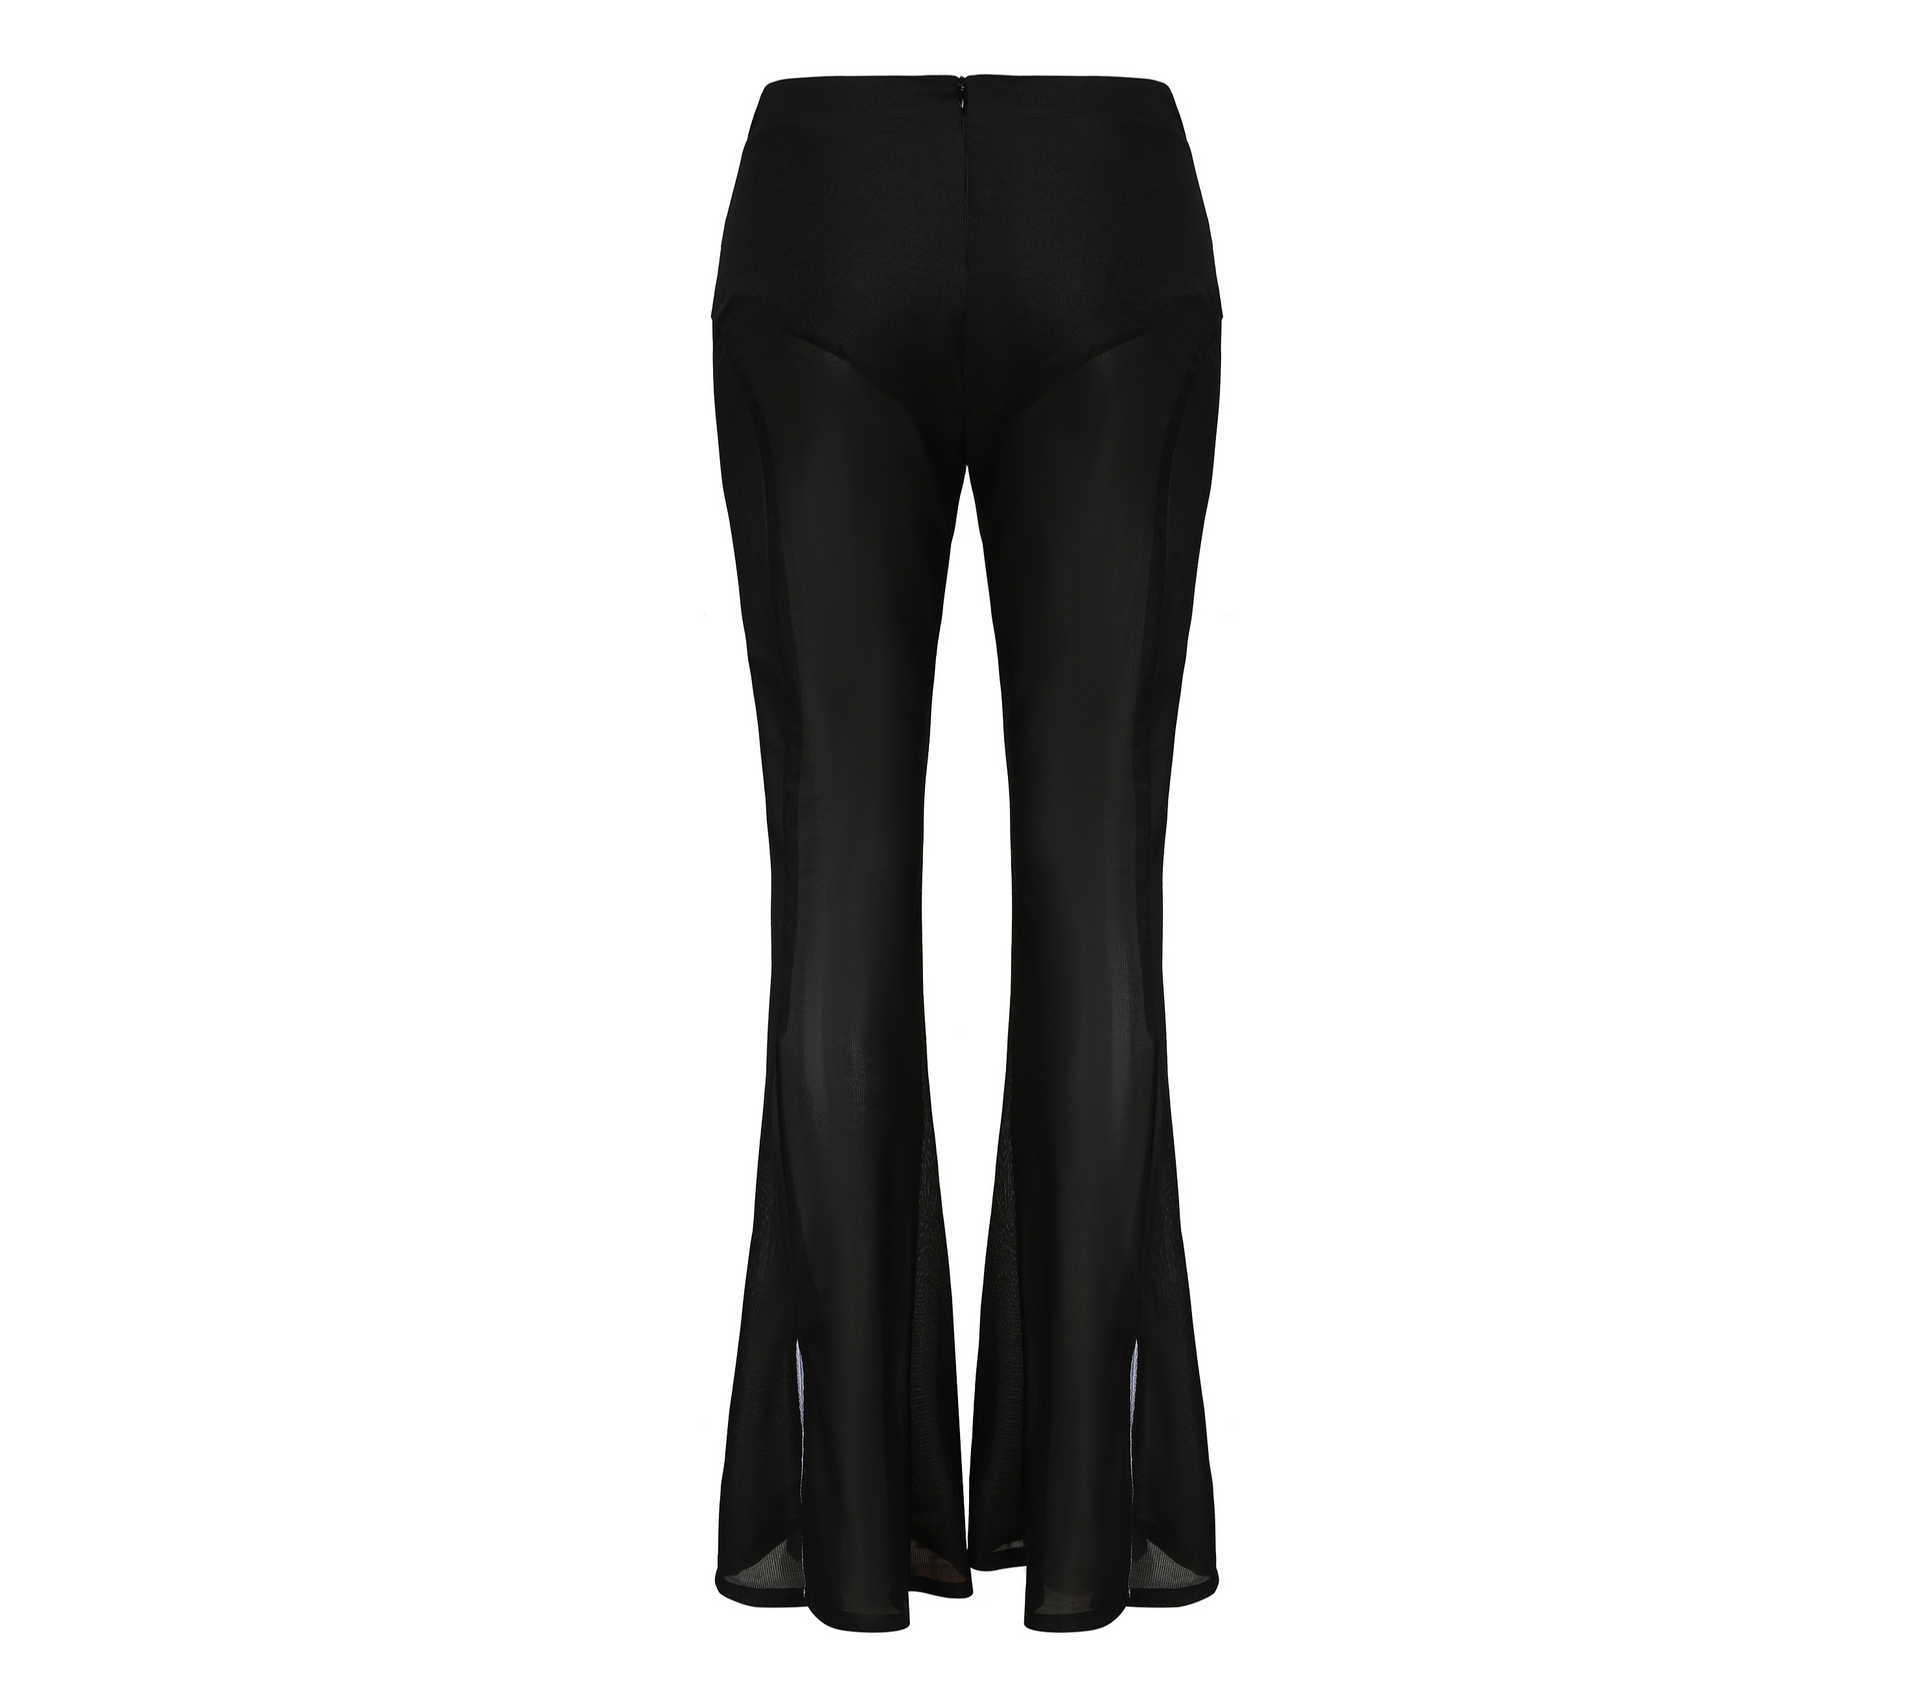 Meng Mid Rise Flare Pants, MID-RISE - WIDE-LEG - FULL LENGTH, Stretch Knit Fabric and Lining, Brocade Knot Button Center Front, black, back